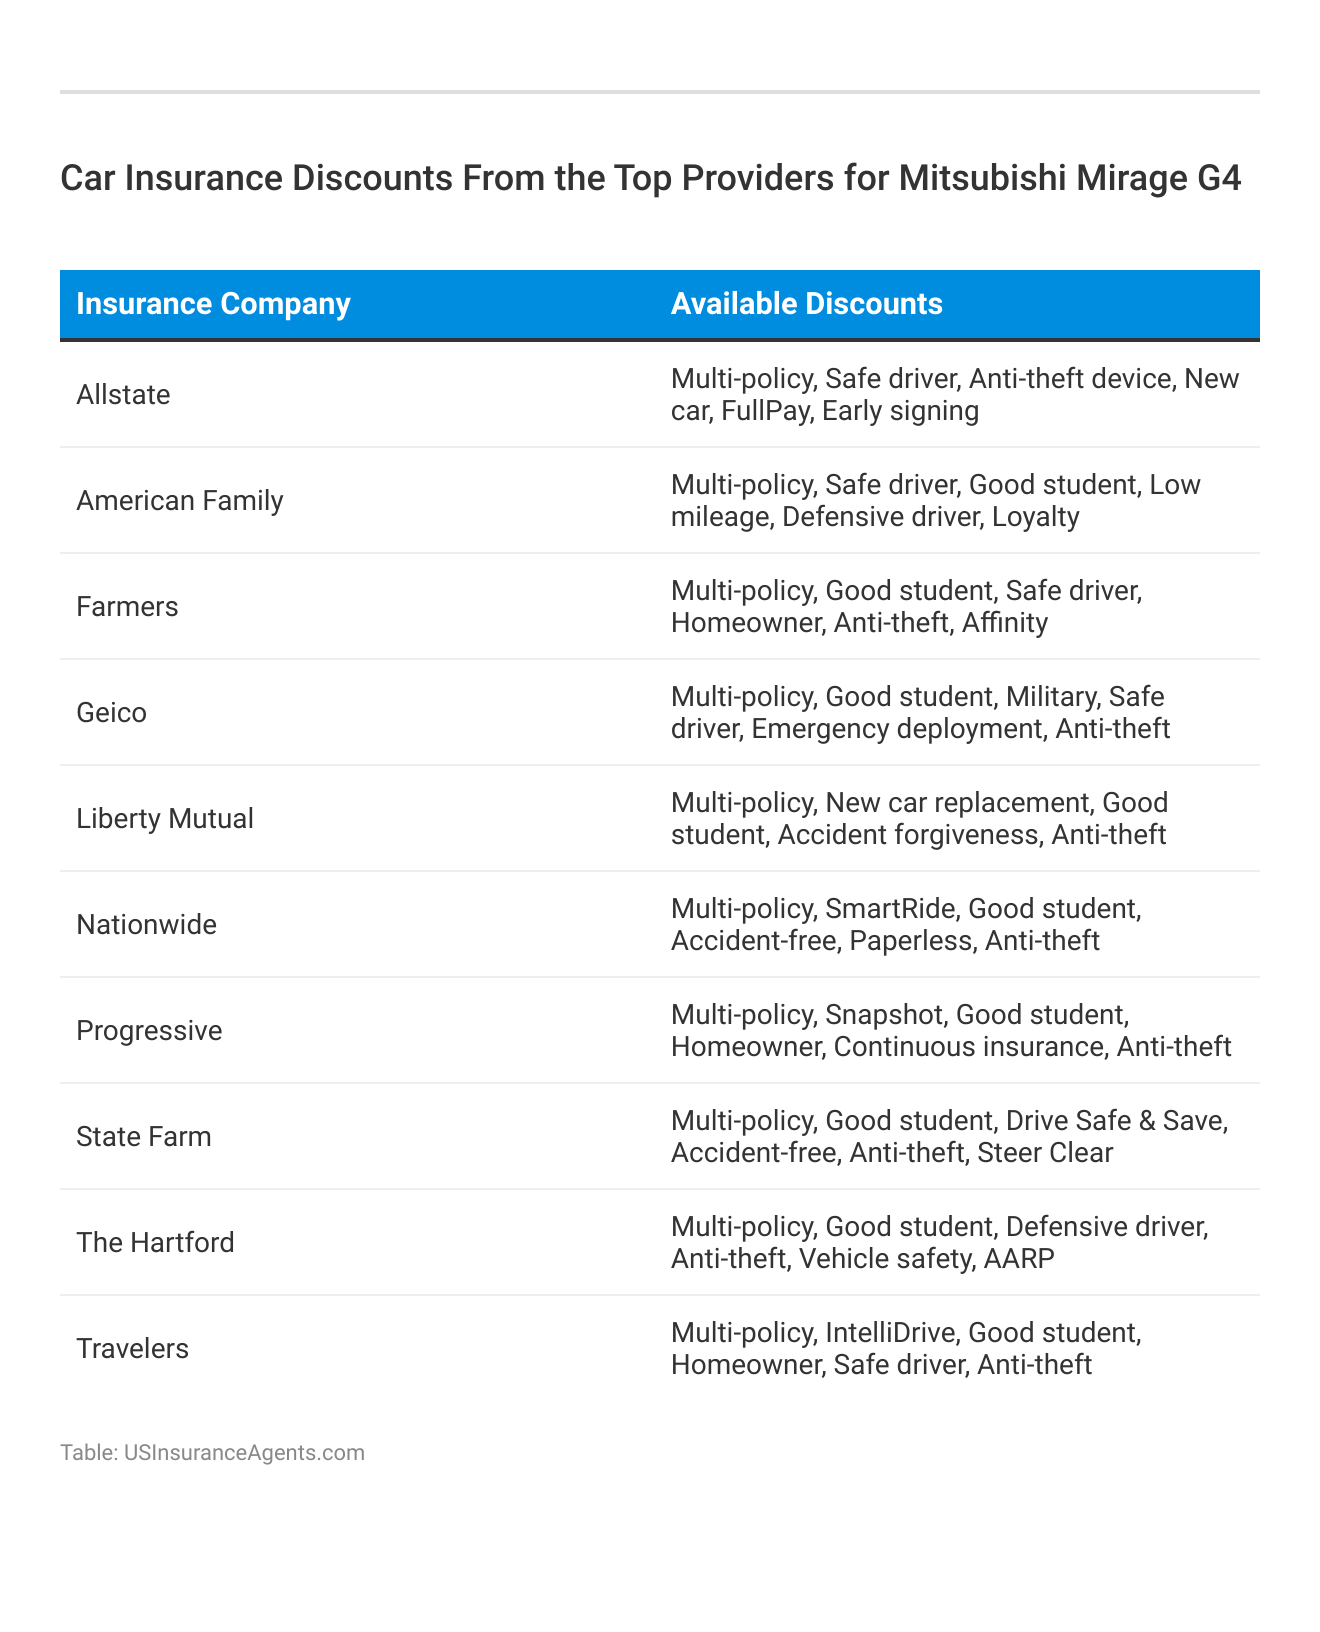 <h3>Car Insurance Discounts From the Top Providers for Mitsubishi Mirage G4</h3>